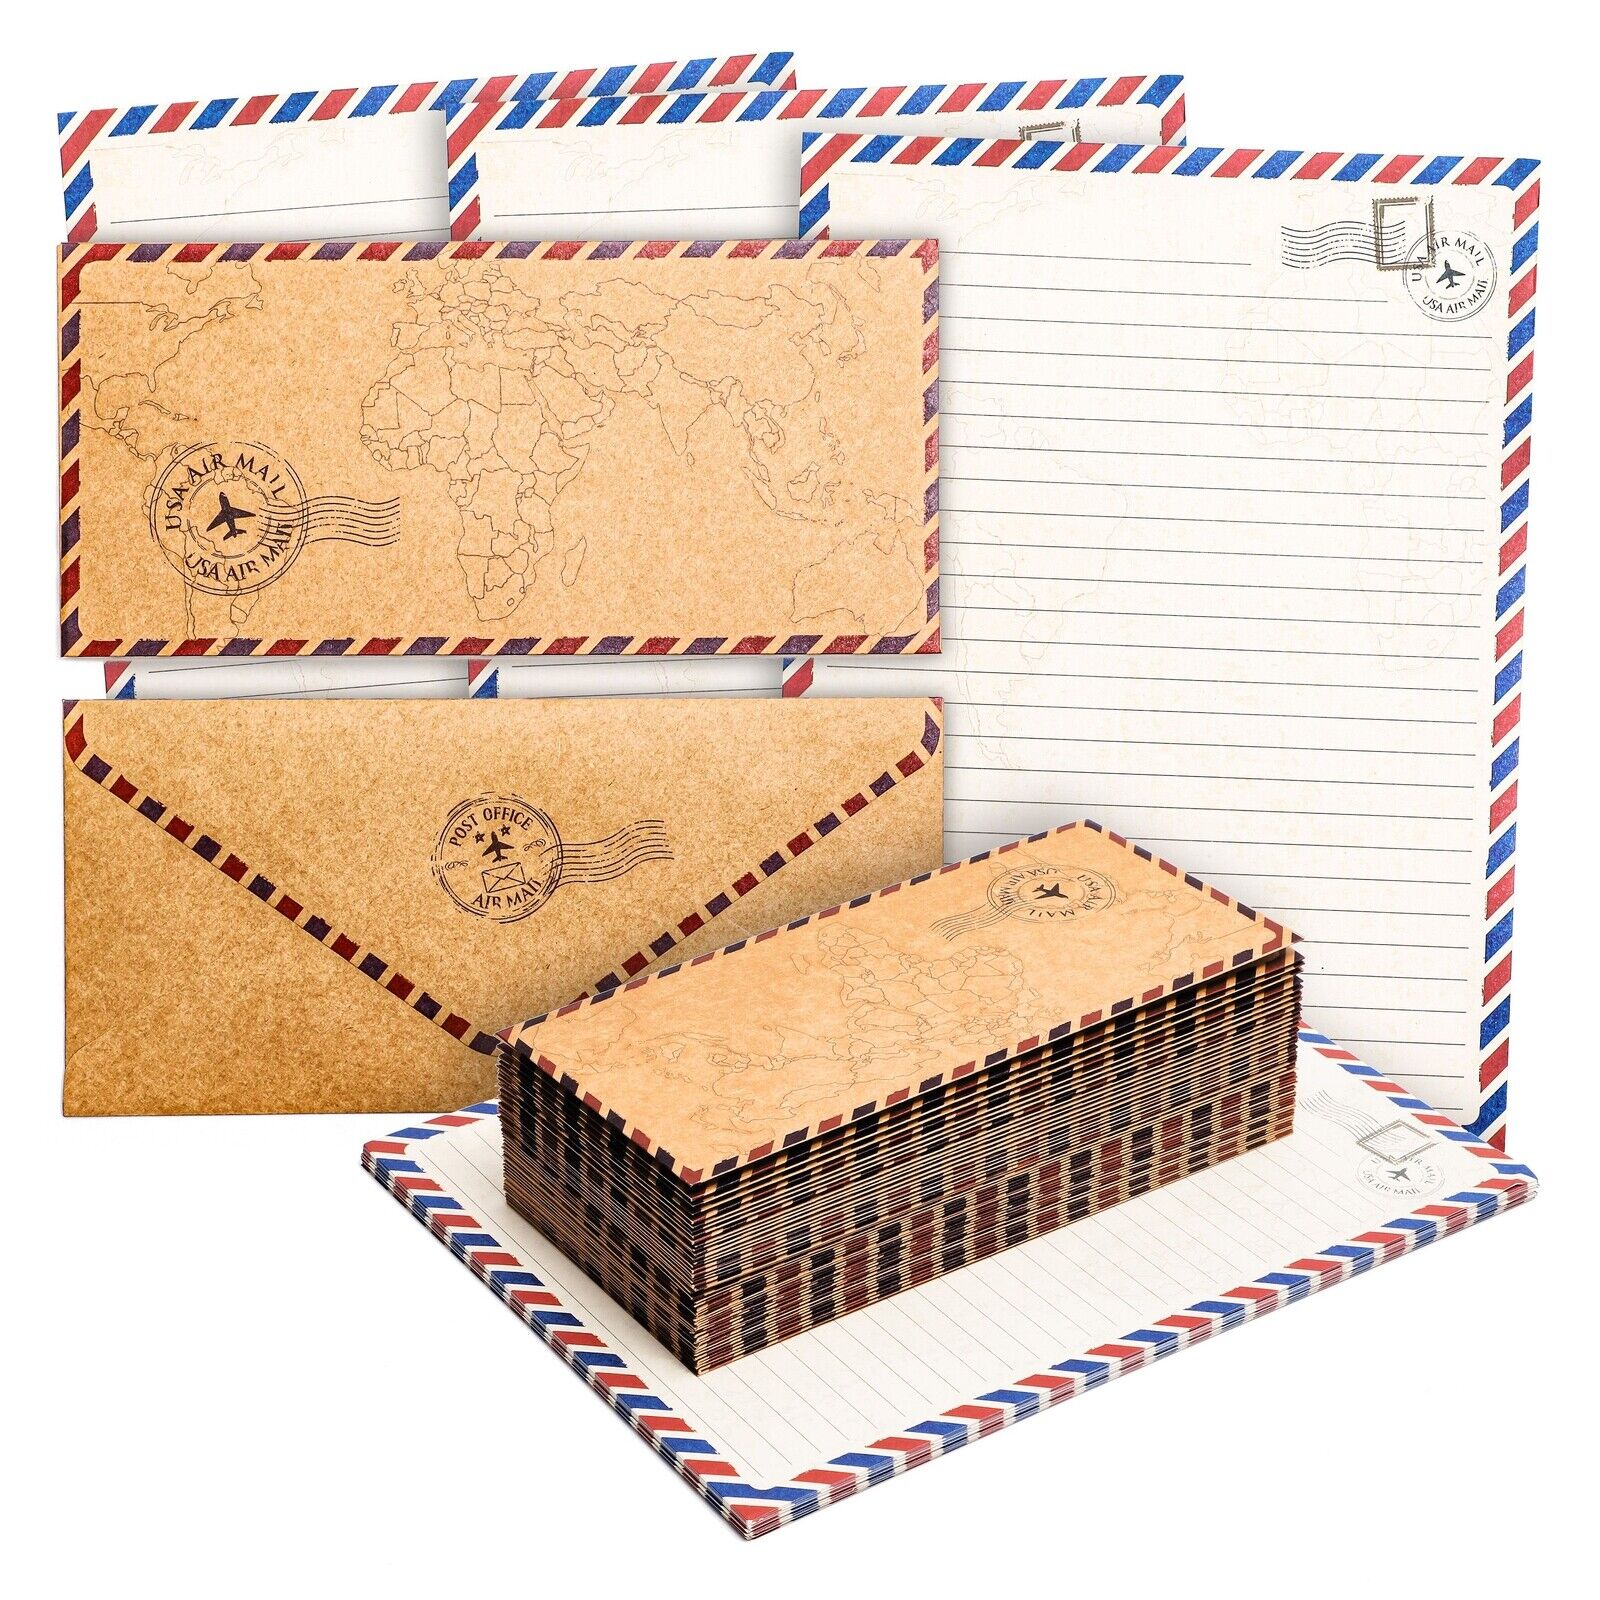 96 Pack Vintage-Style Airmail Stationery Set, 48 Lined Paper Sheets, Envelopes